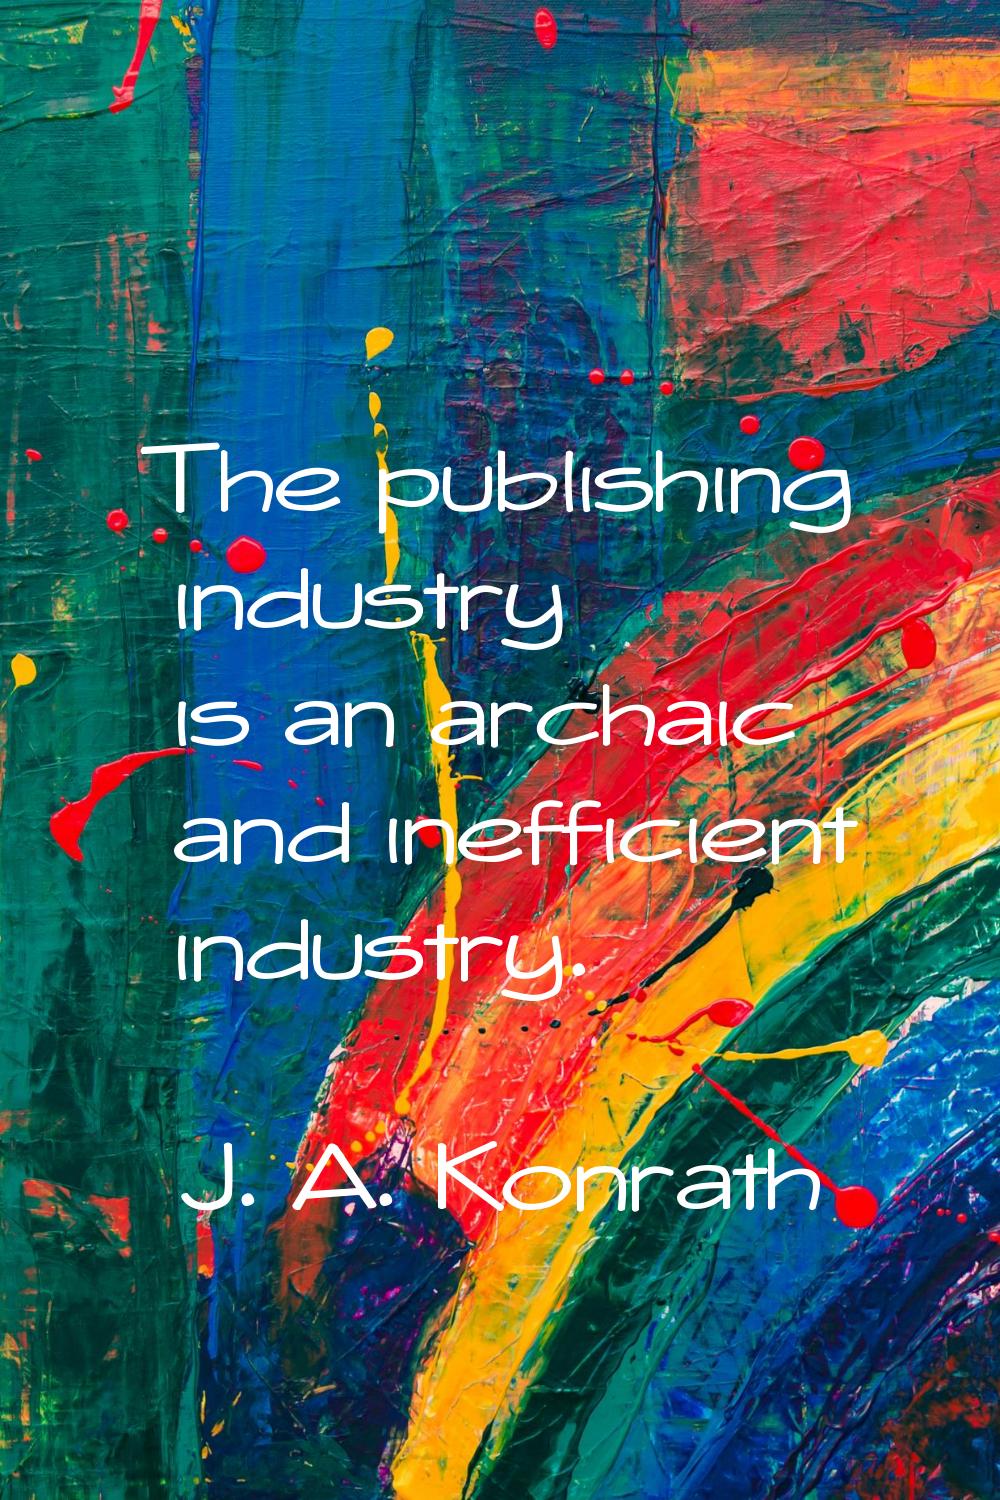 The publishing industry is an archaic and inefficient industry.